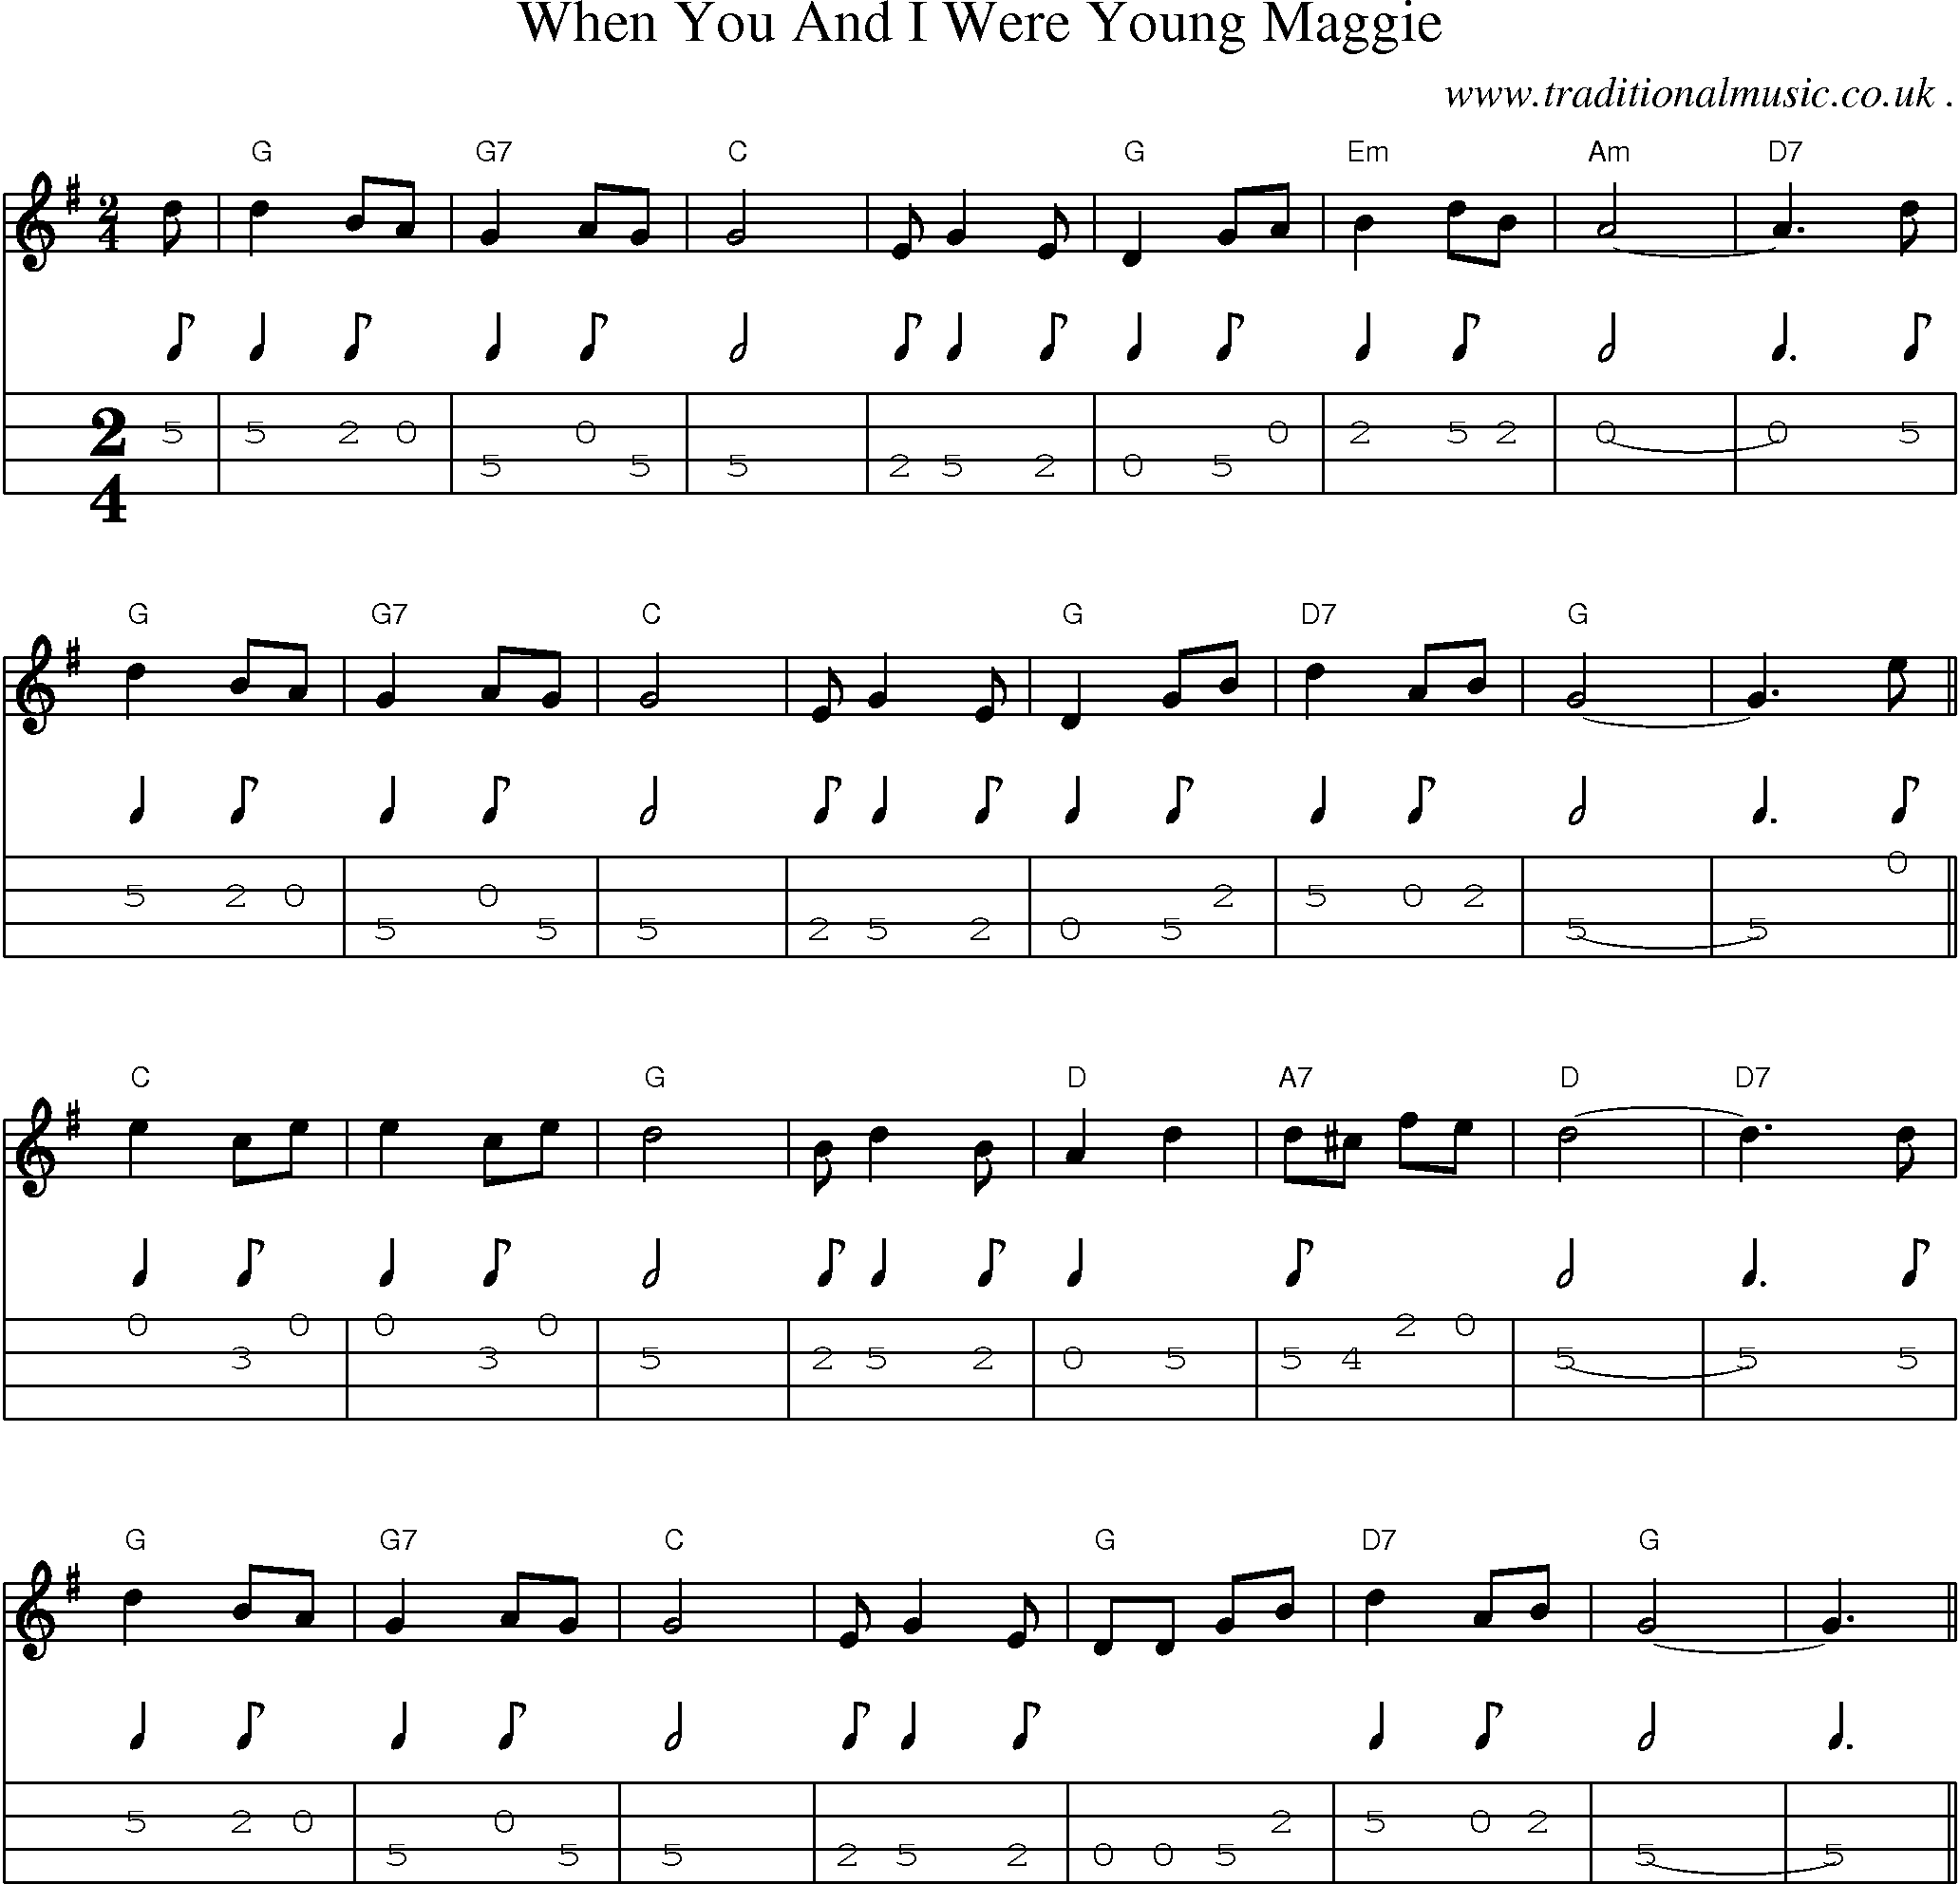 Sheet-Music and Mandolin Tabs for When You And I Were Young Maggie